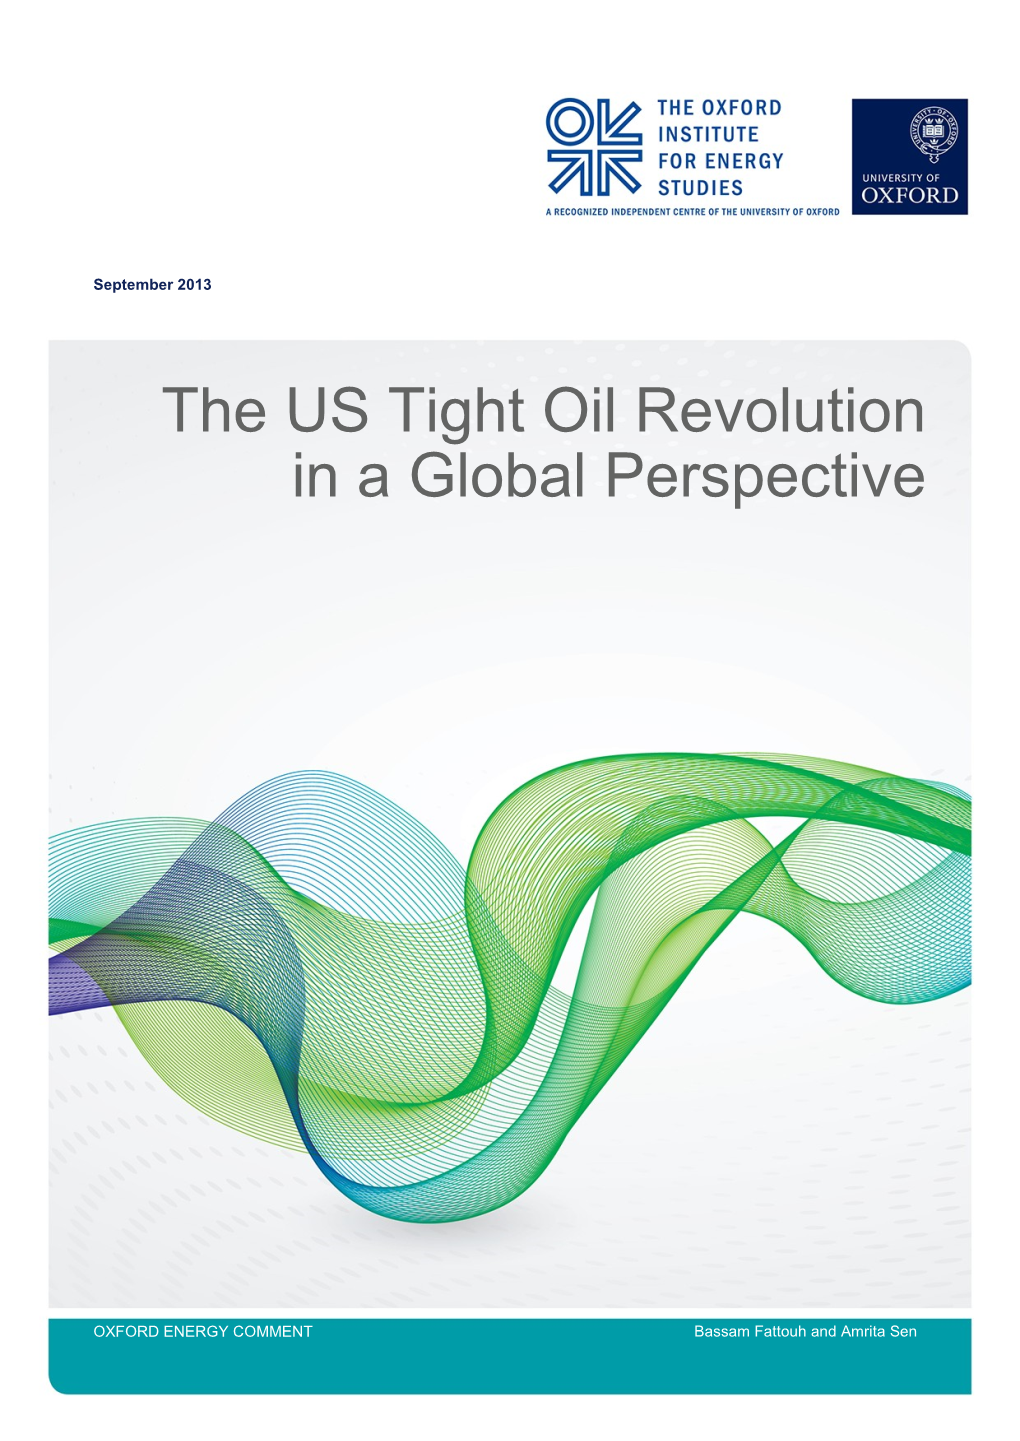 The US Tight Oil Revolution in a Global Perspective